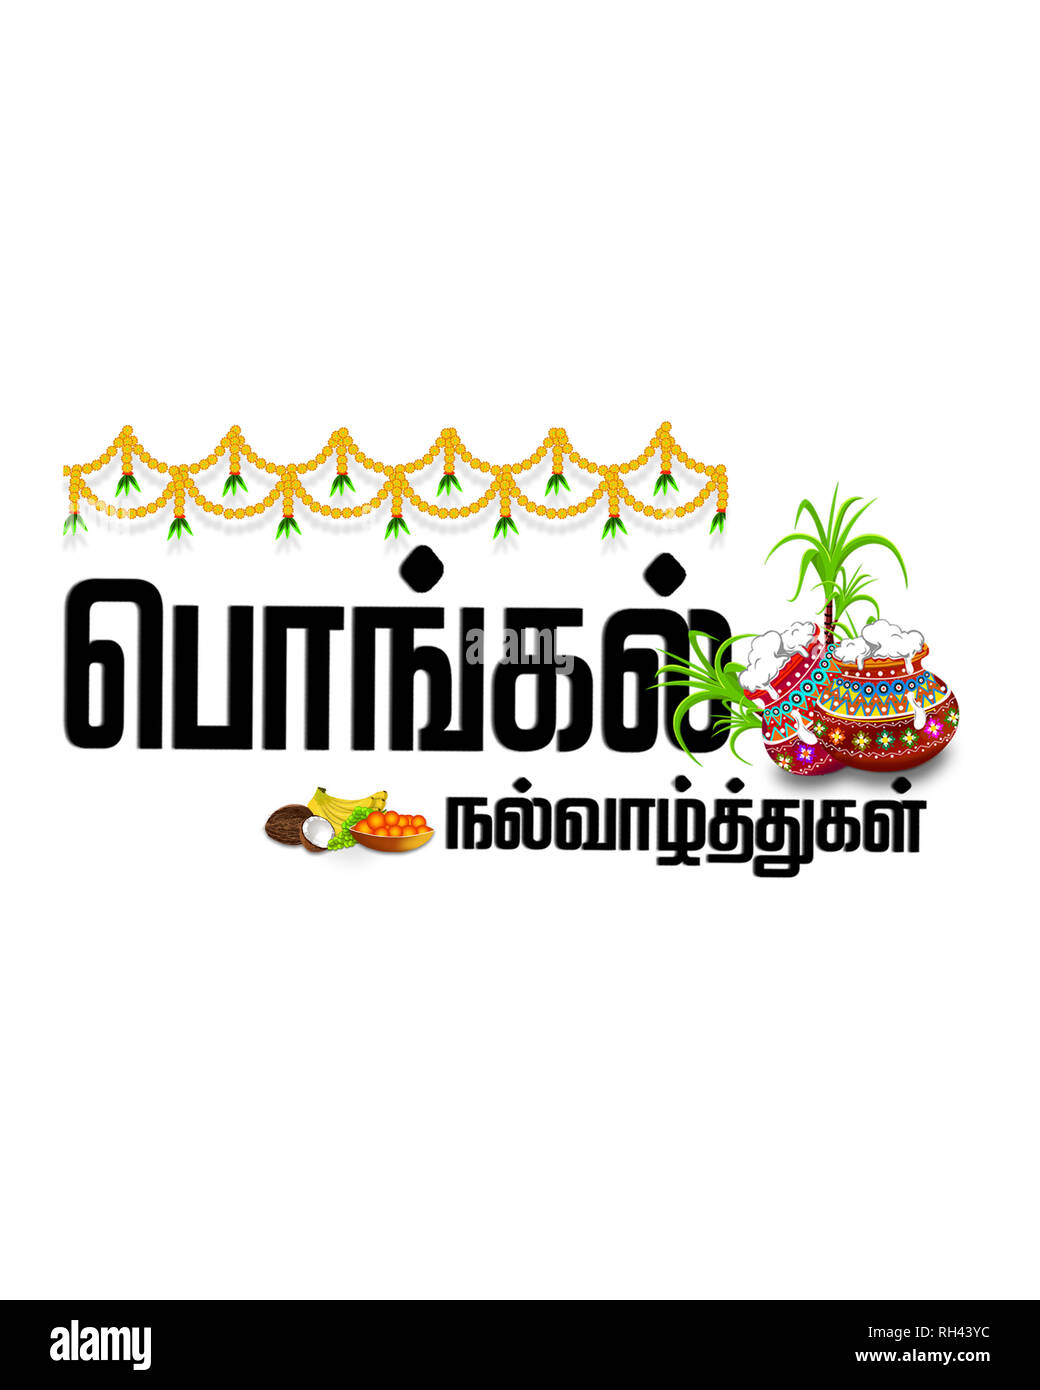 south indian harvesting festival celebrations poster or banner design with shiny text happy pongal RH43YC